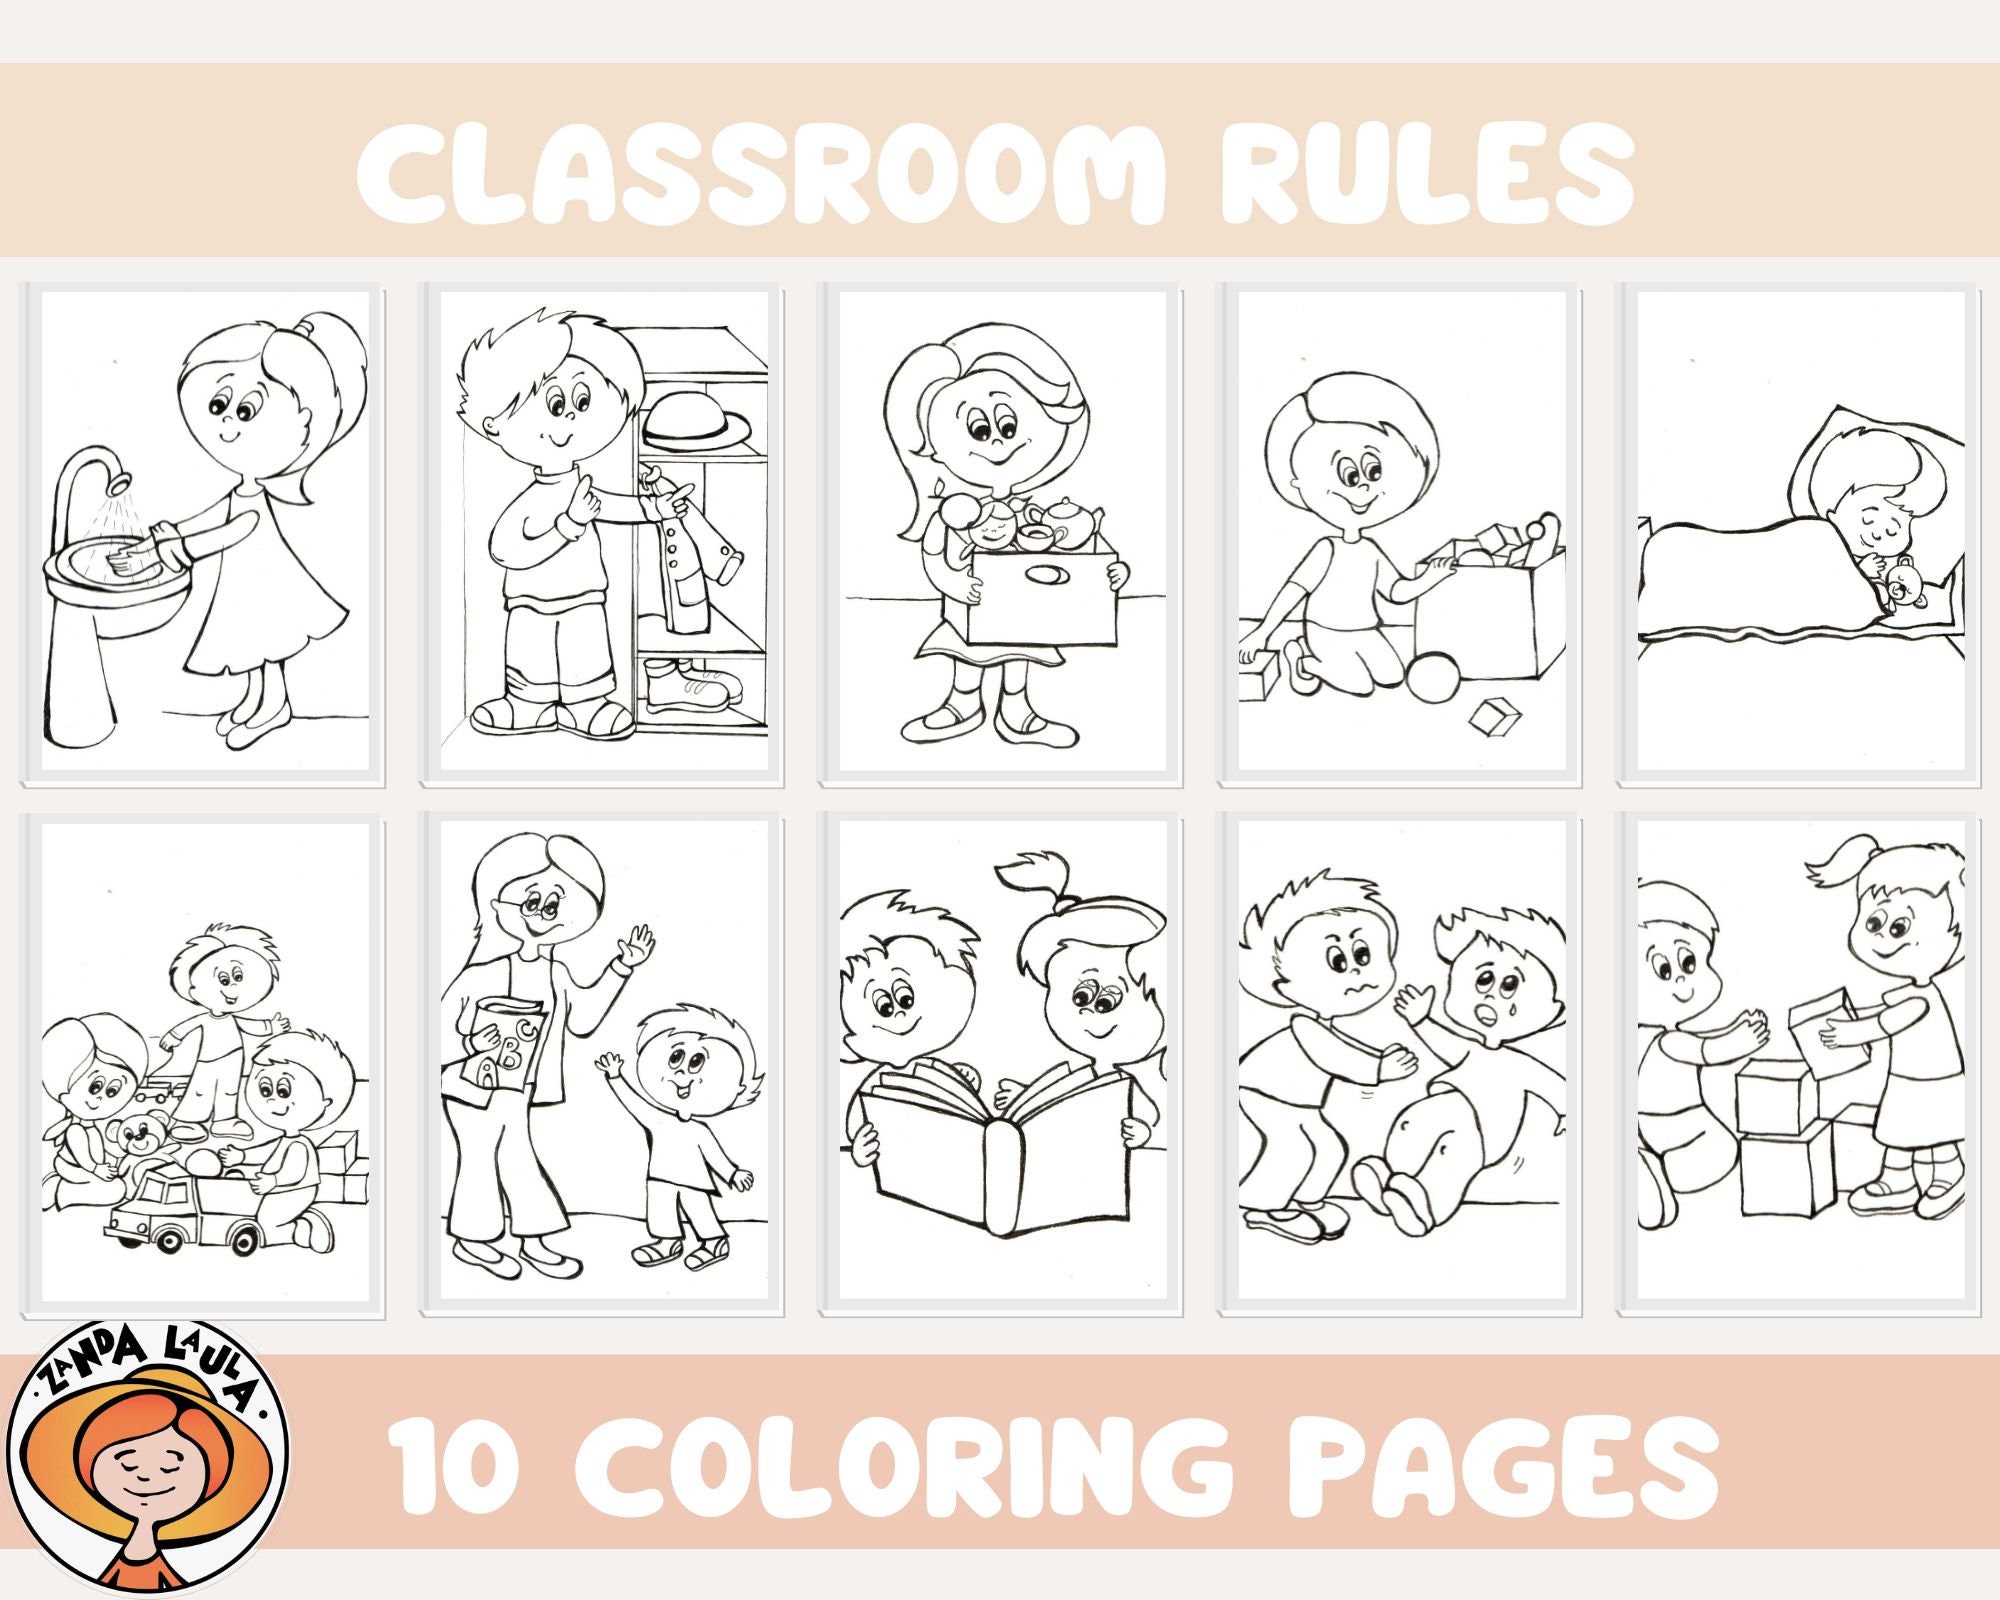 Classrom rules coloring pages for kids best preschool printables teacher learning kindrergarten daycare classroom posters pdf jpg